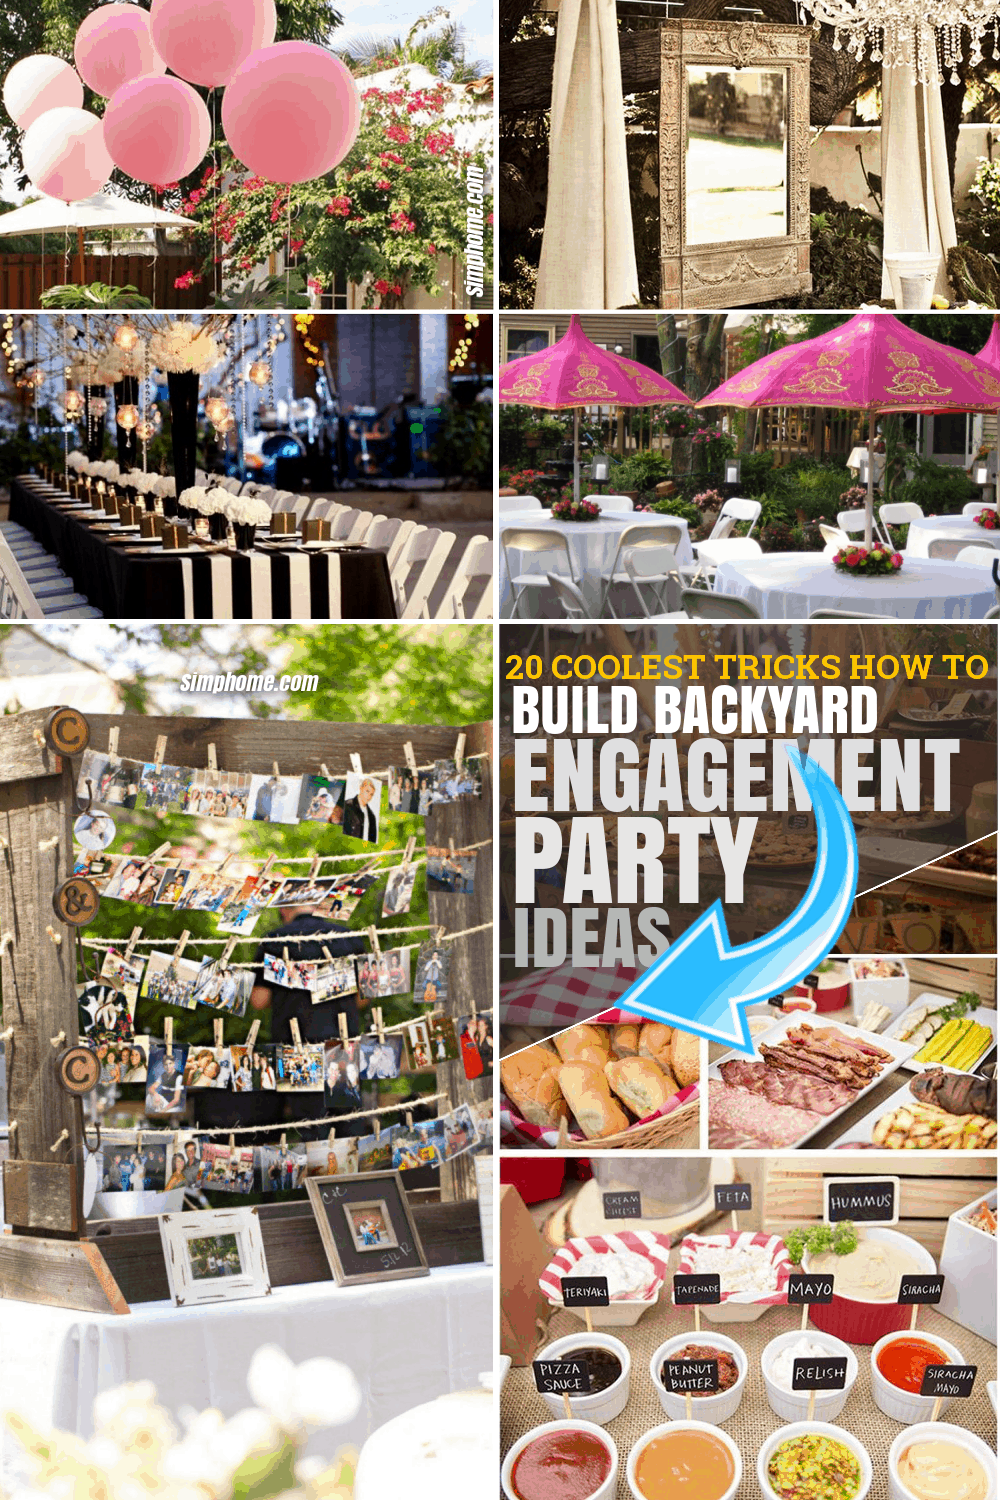 SIMPHOME.COM .How to Build Backyard Engagement Party Ideas.Pinterest Featured